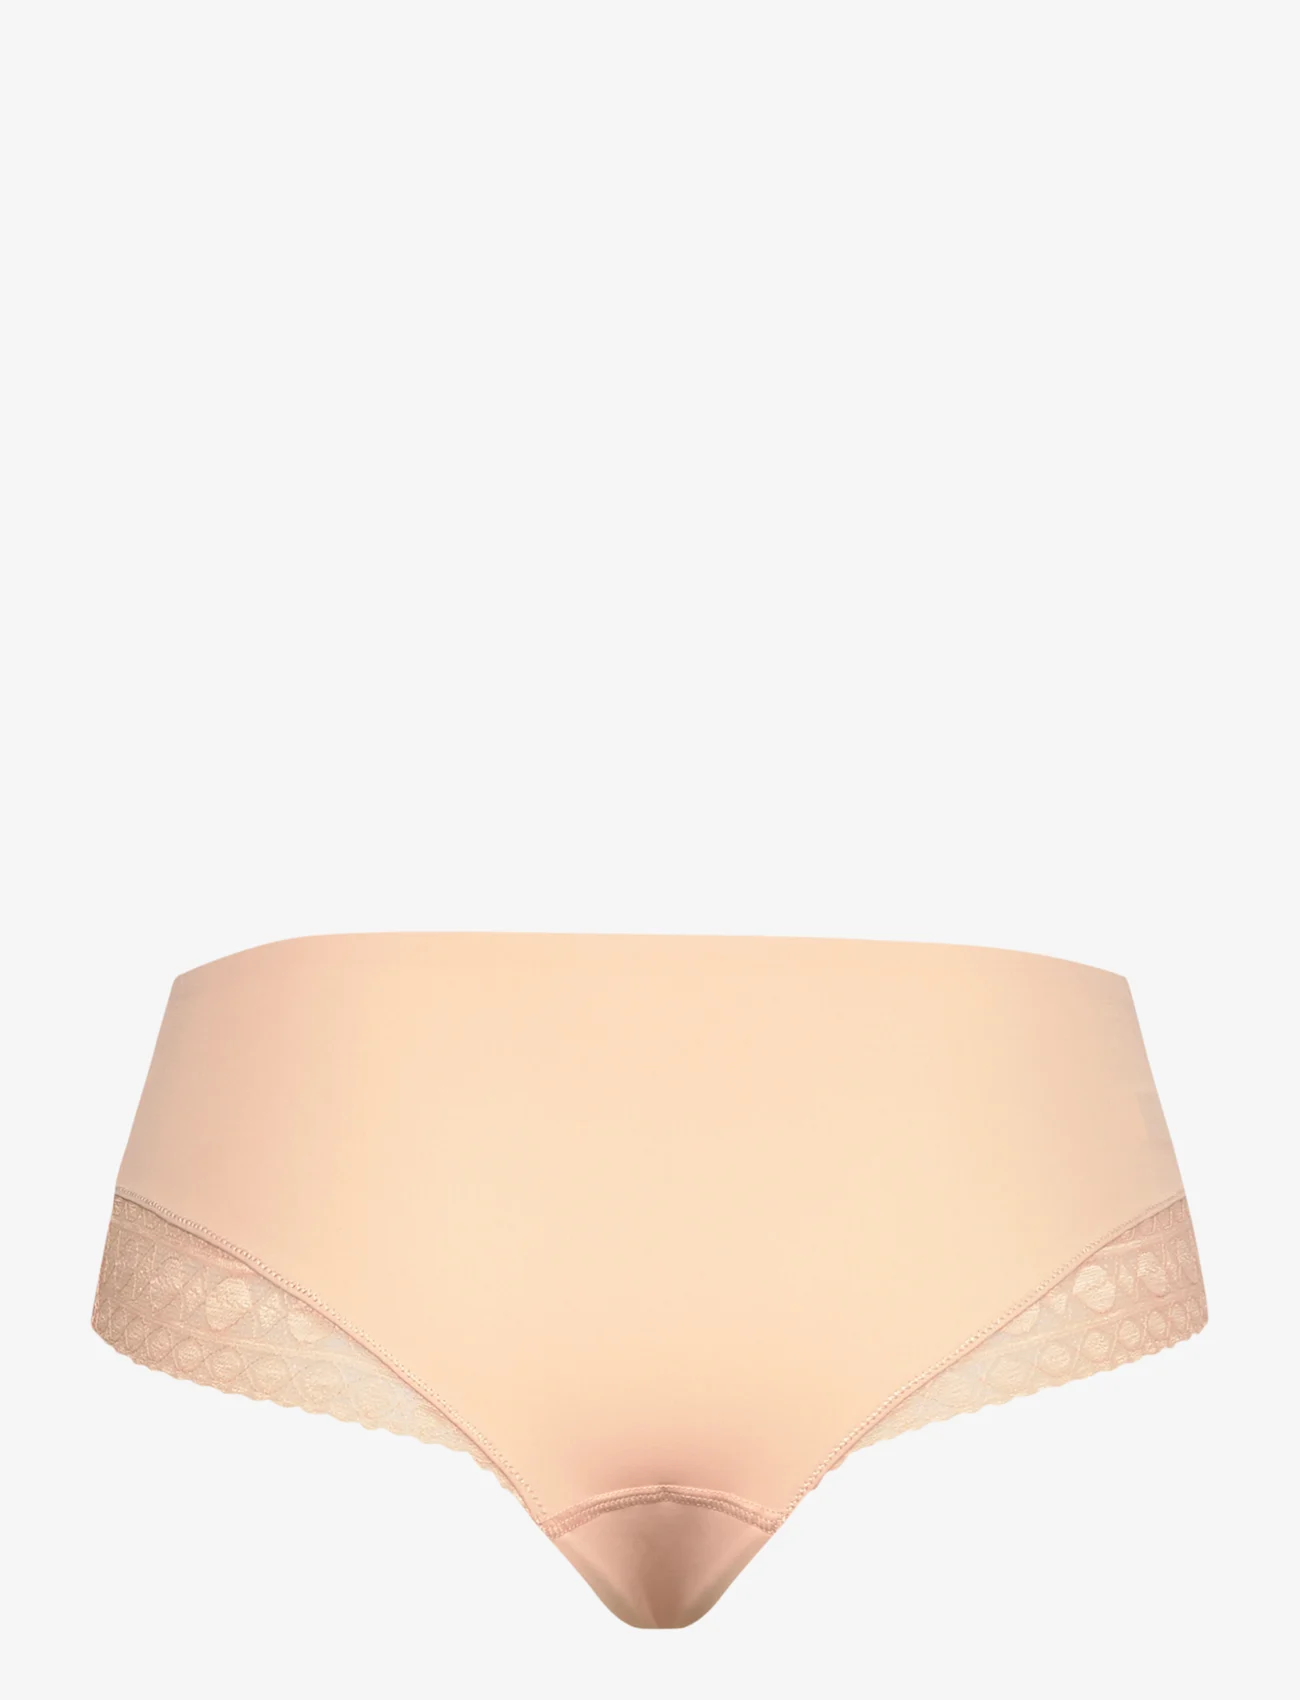 Esprit Bodywear Women - Shaping-effect thong with lace - hinnapidu - dusty nude 5 - 1